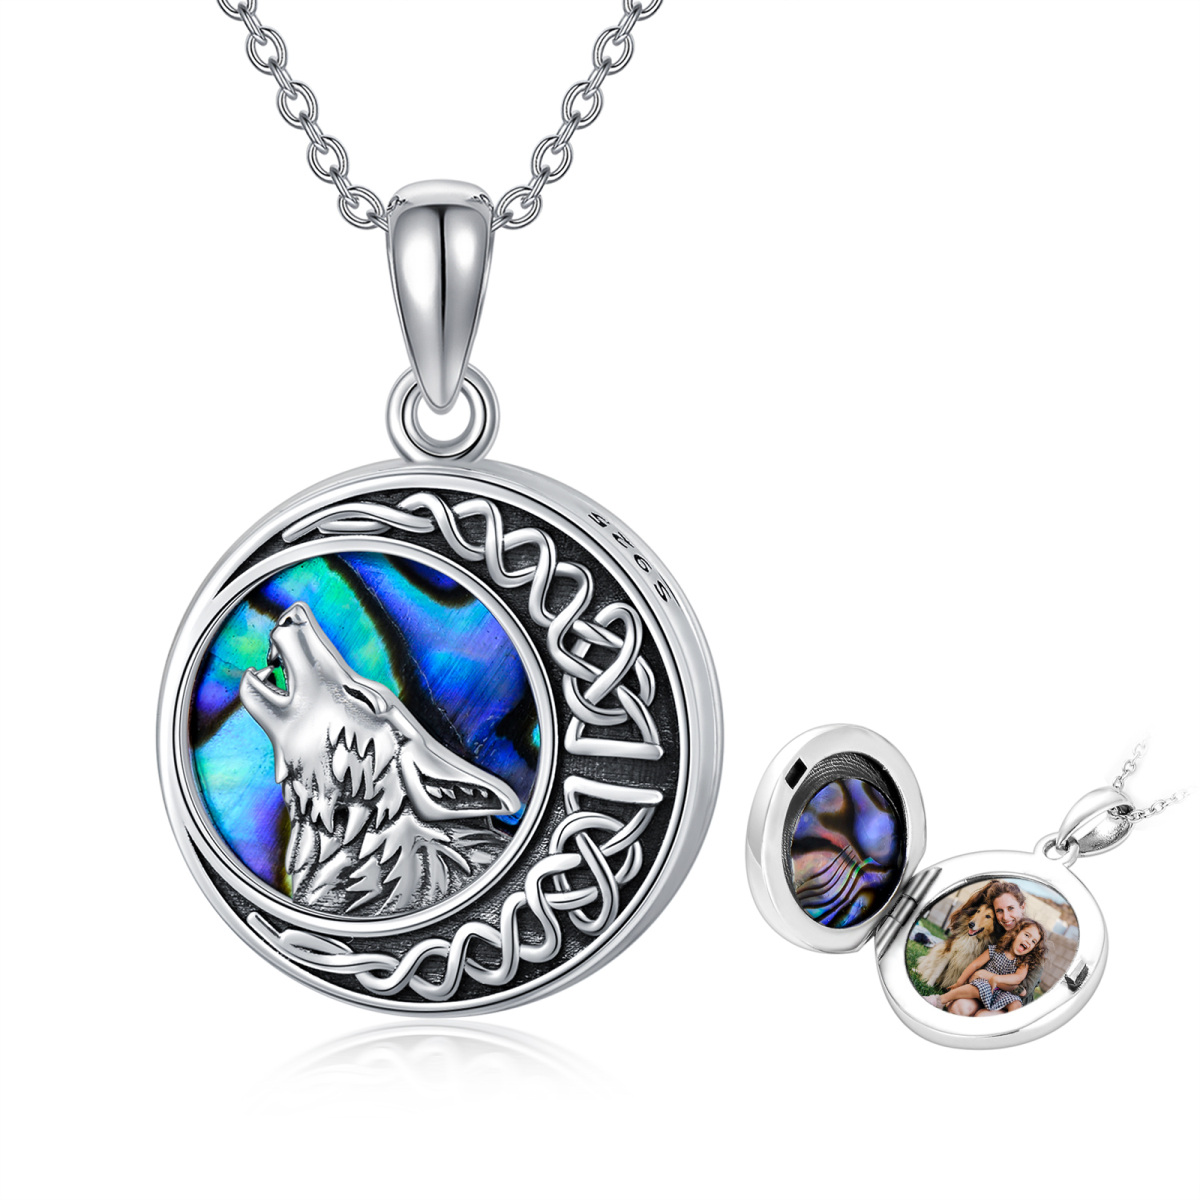 Plata de ley Abalone Shellfish Wolf & Celtic Knot & Moon Circular Shaped Personalized Photo Locket Necklace with Engraved Word-1